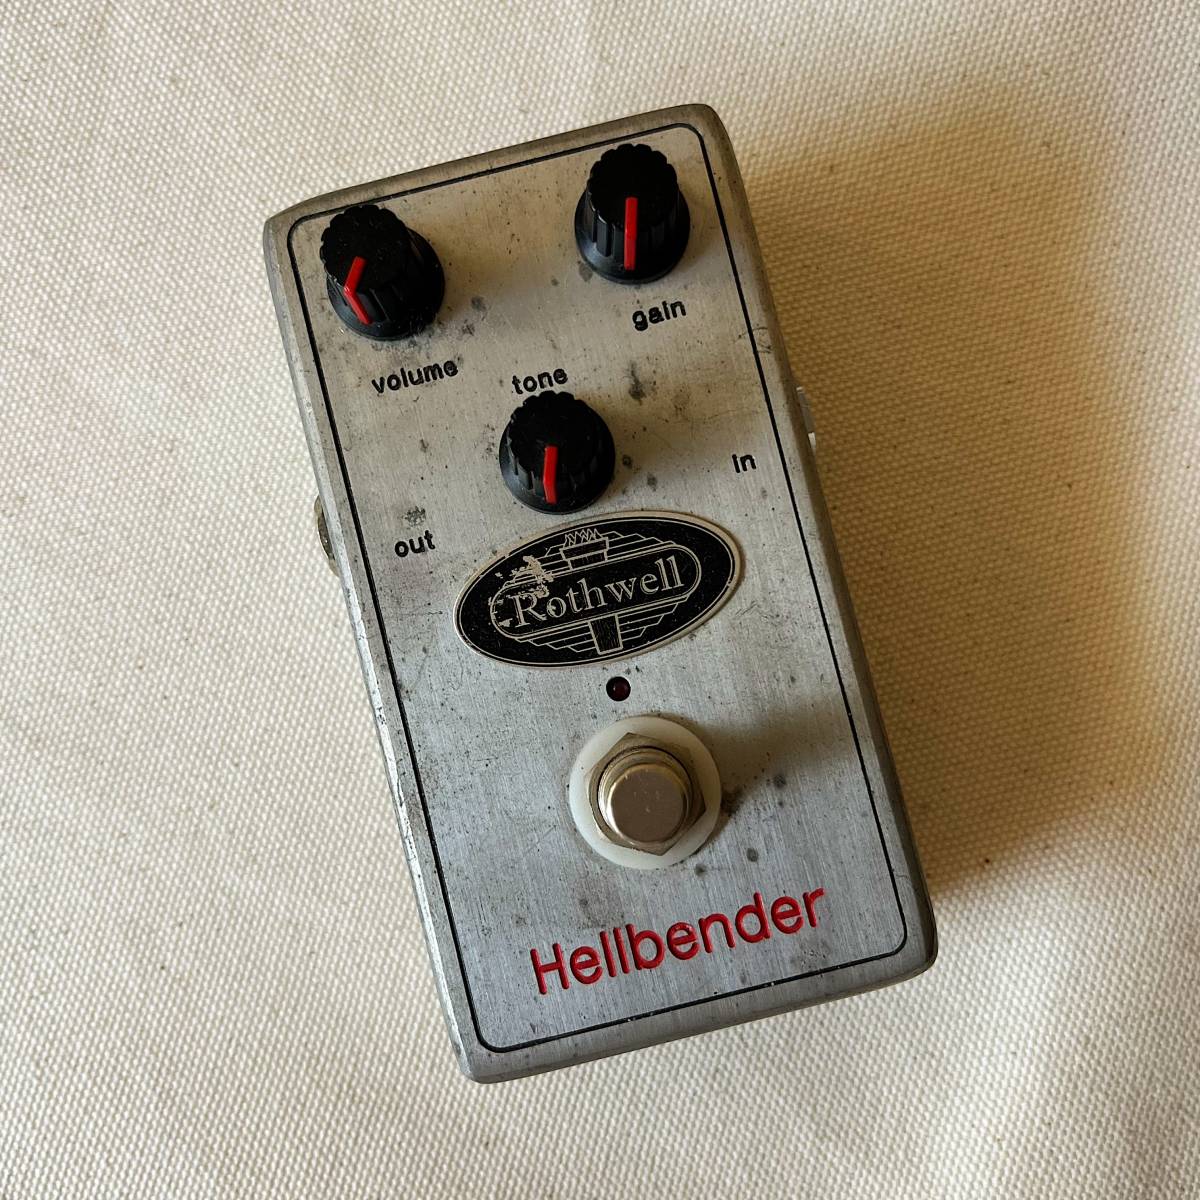 -■Rothwell Hellbender Made in England■-